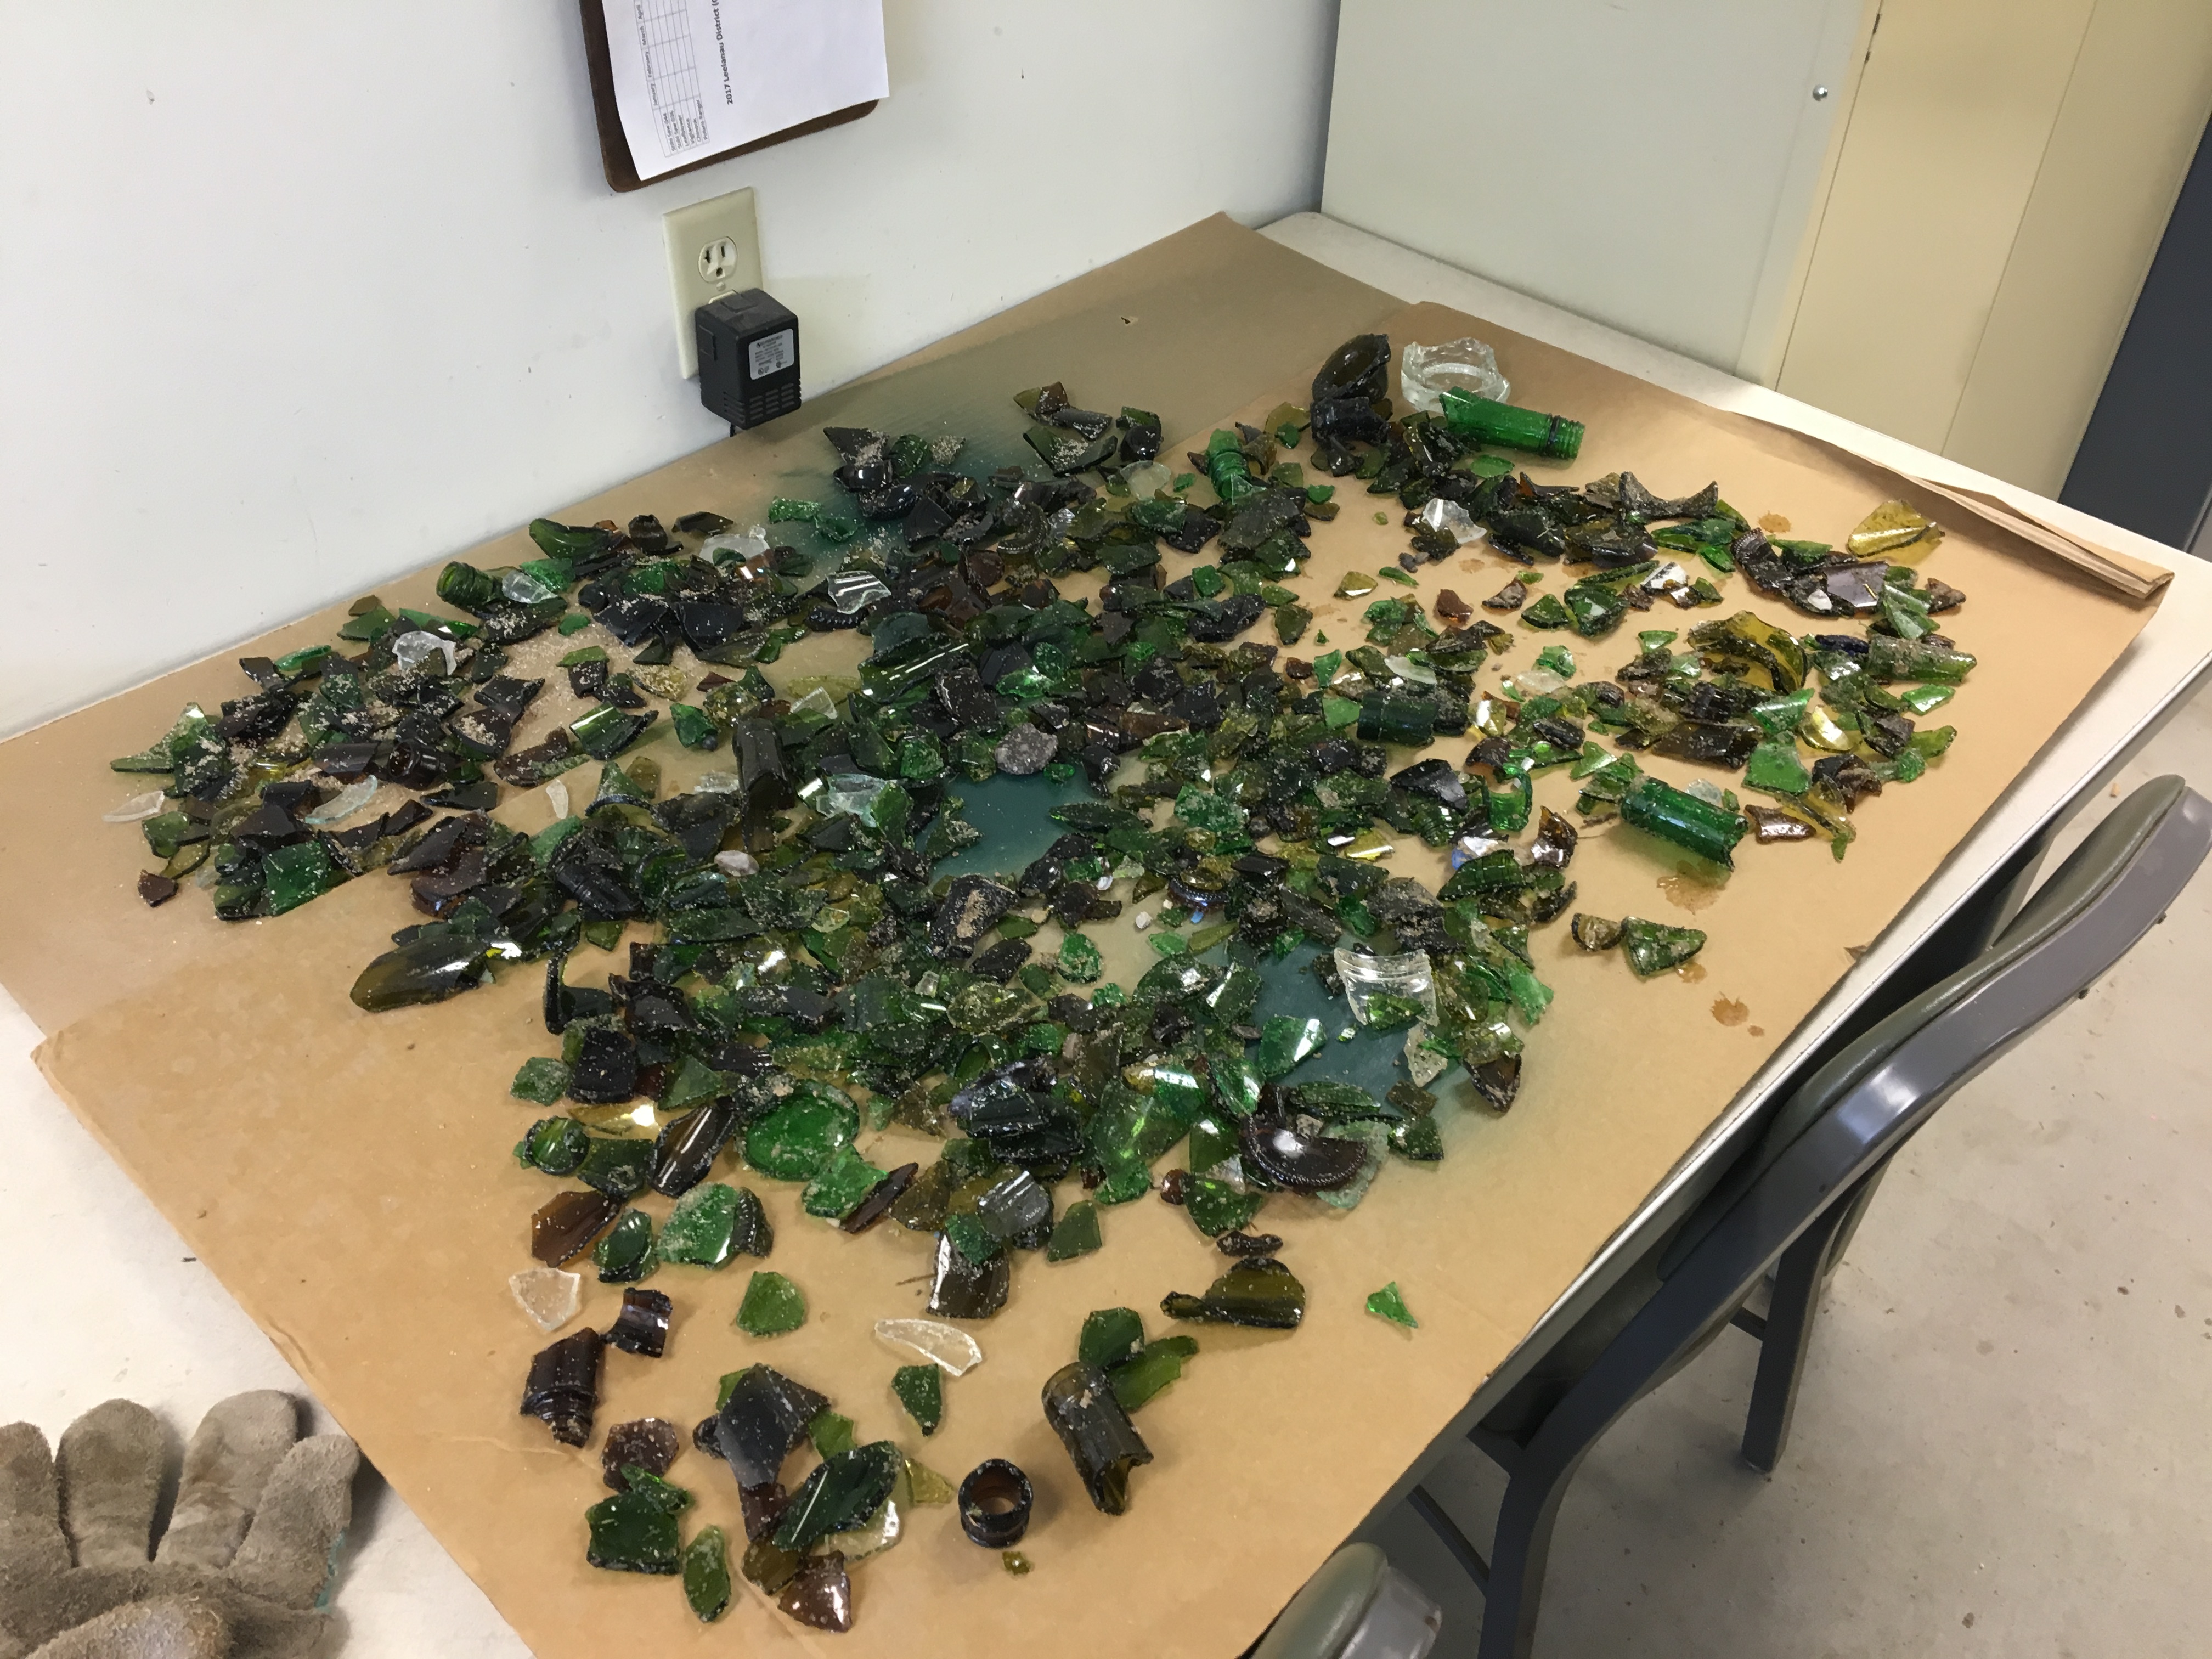 Broken glass spread out on table